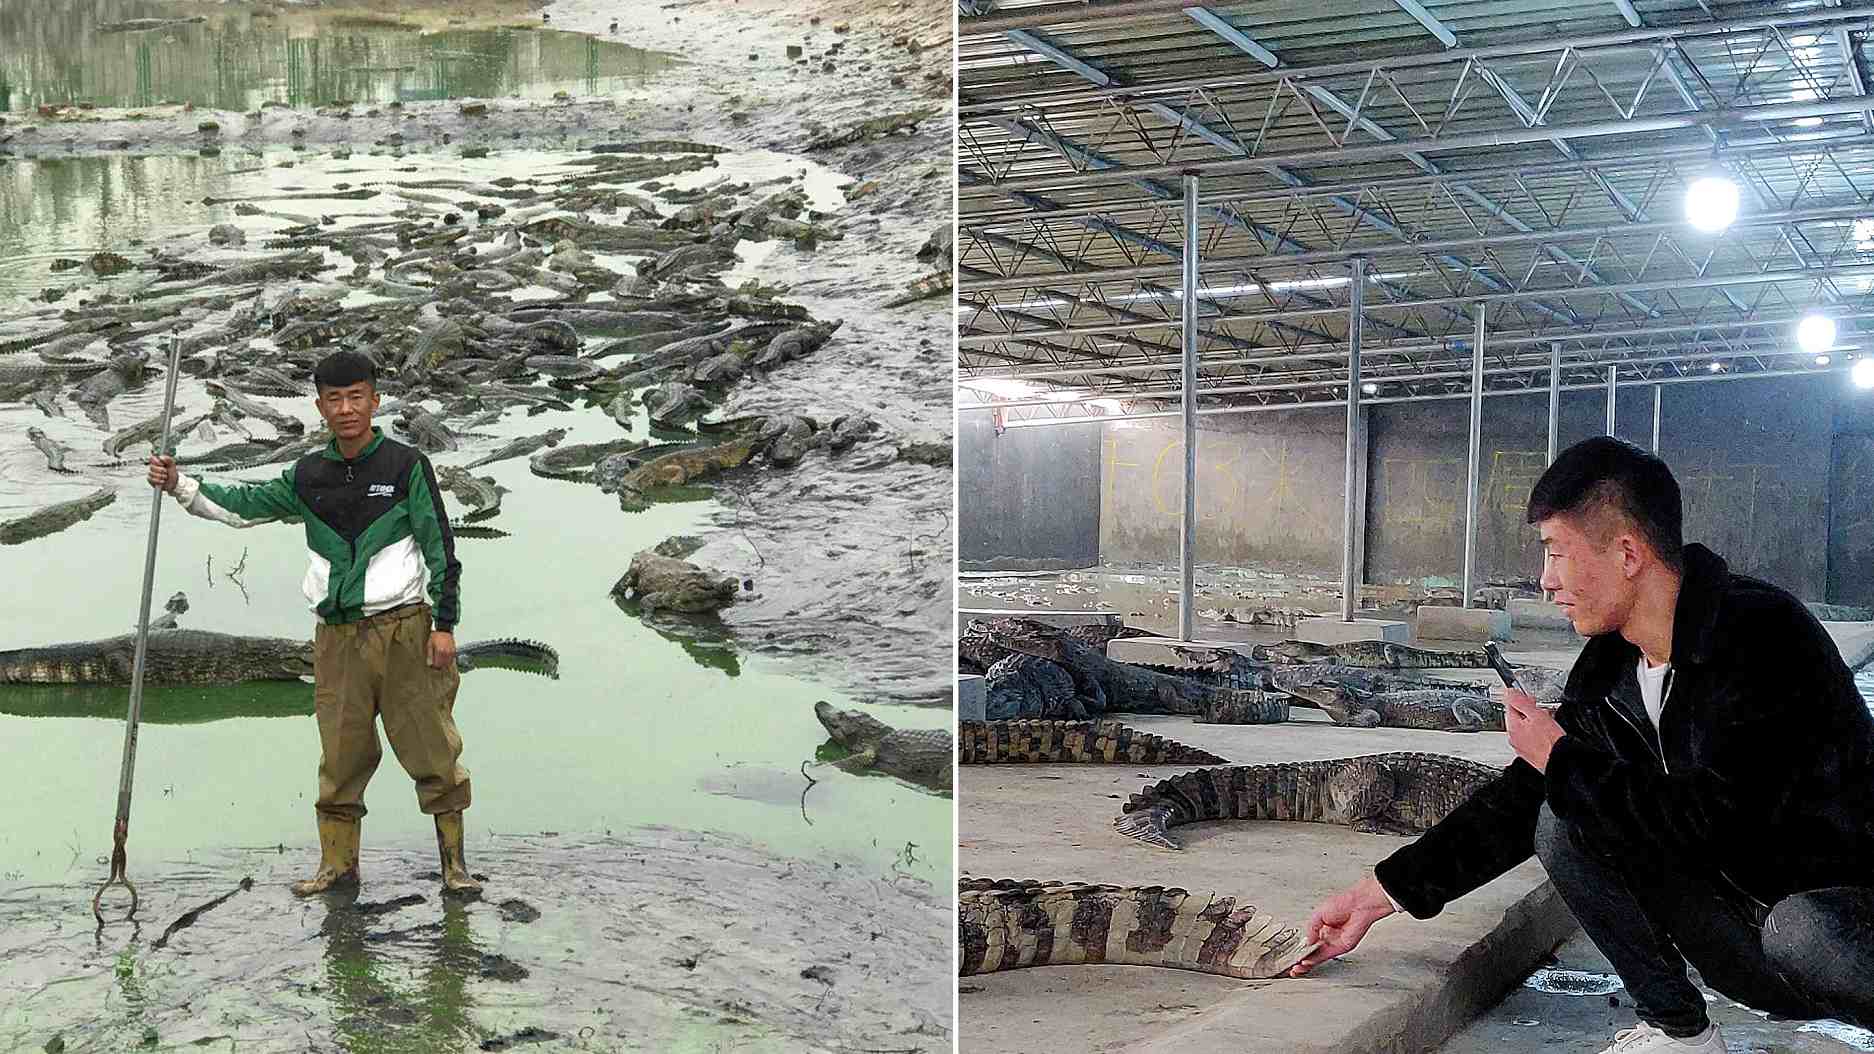 Crocodile farming: how Philippine home improvement entrepreneur got into  it, and became an LVMH supplier